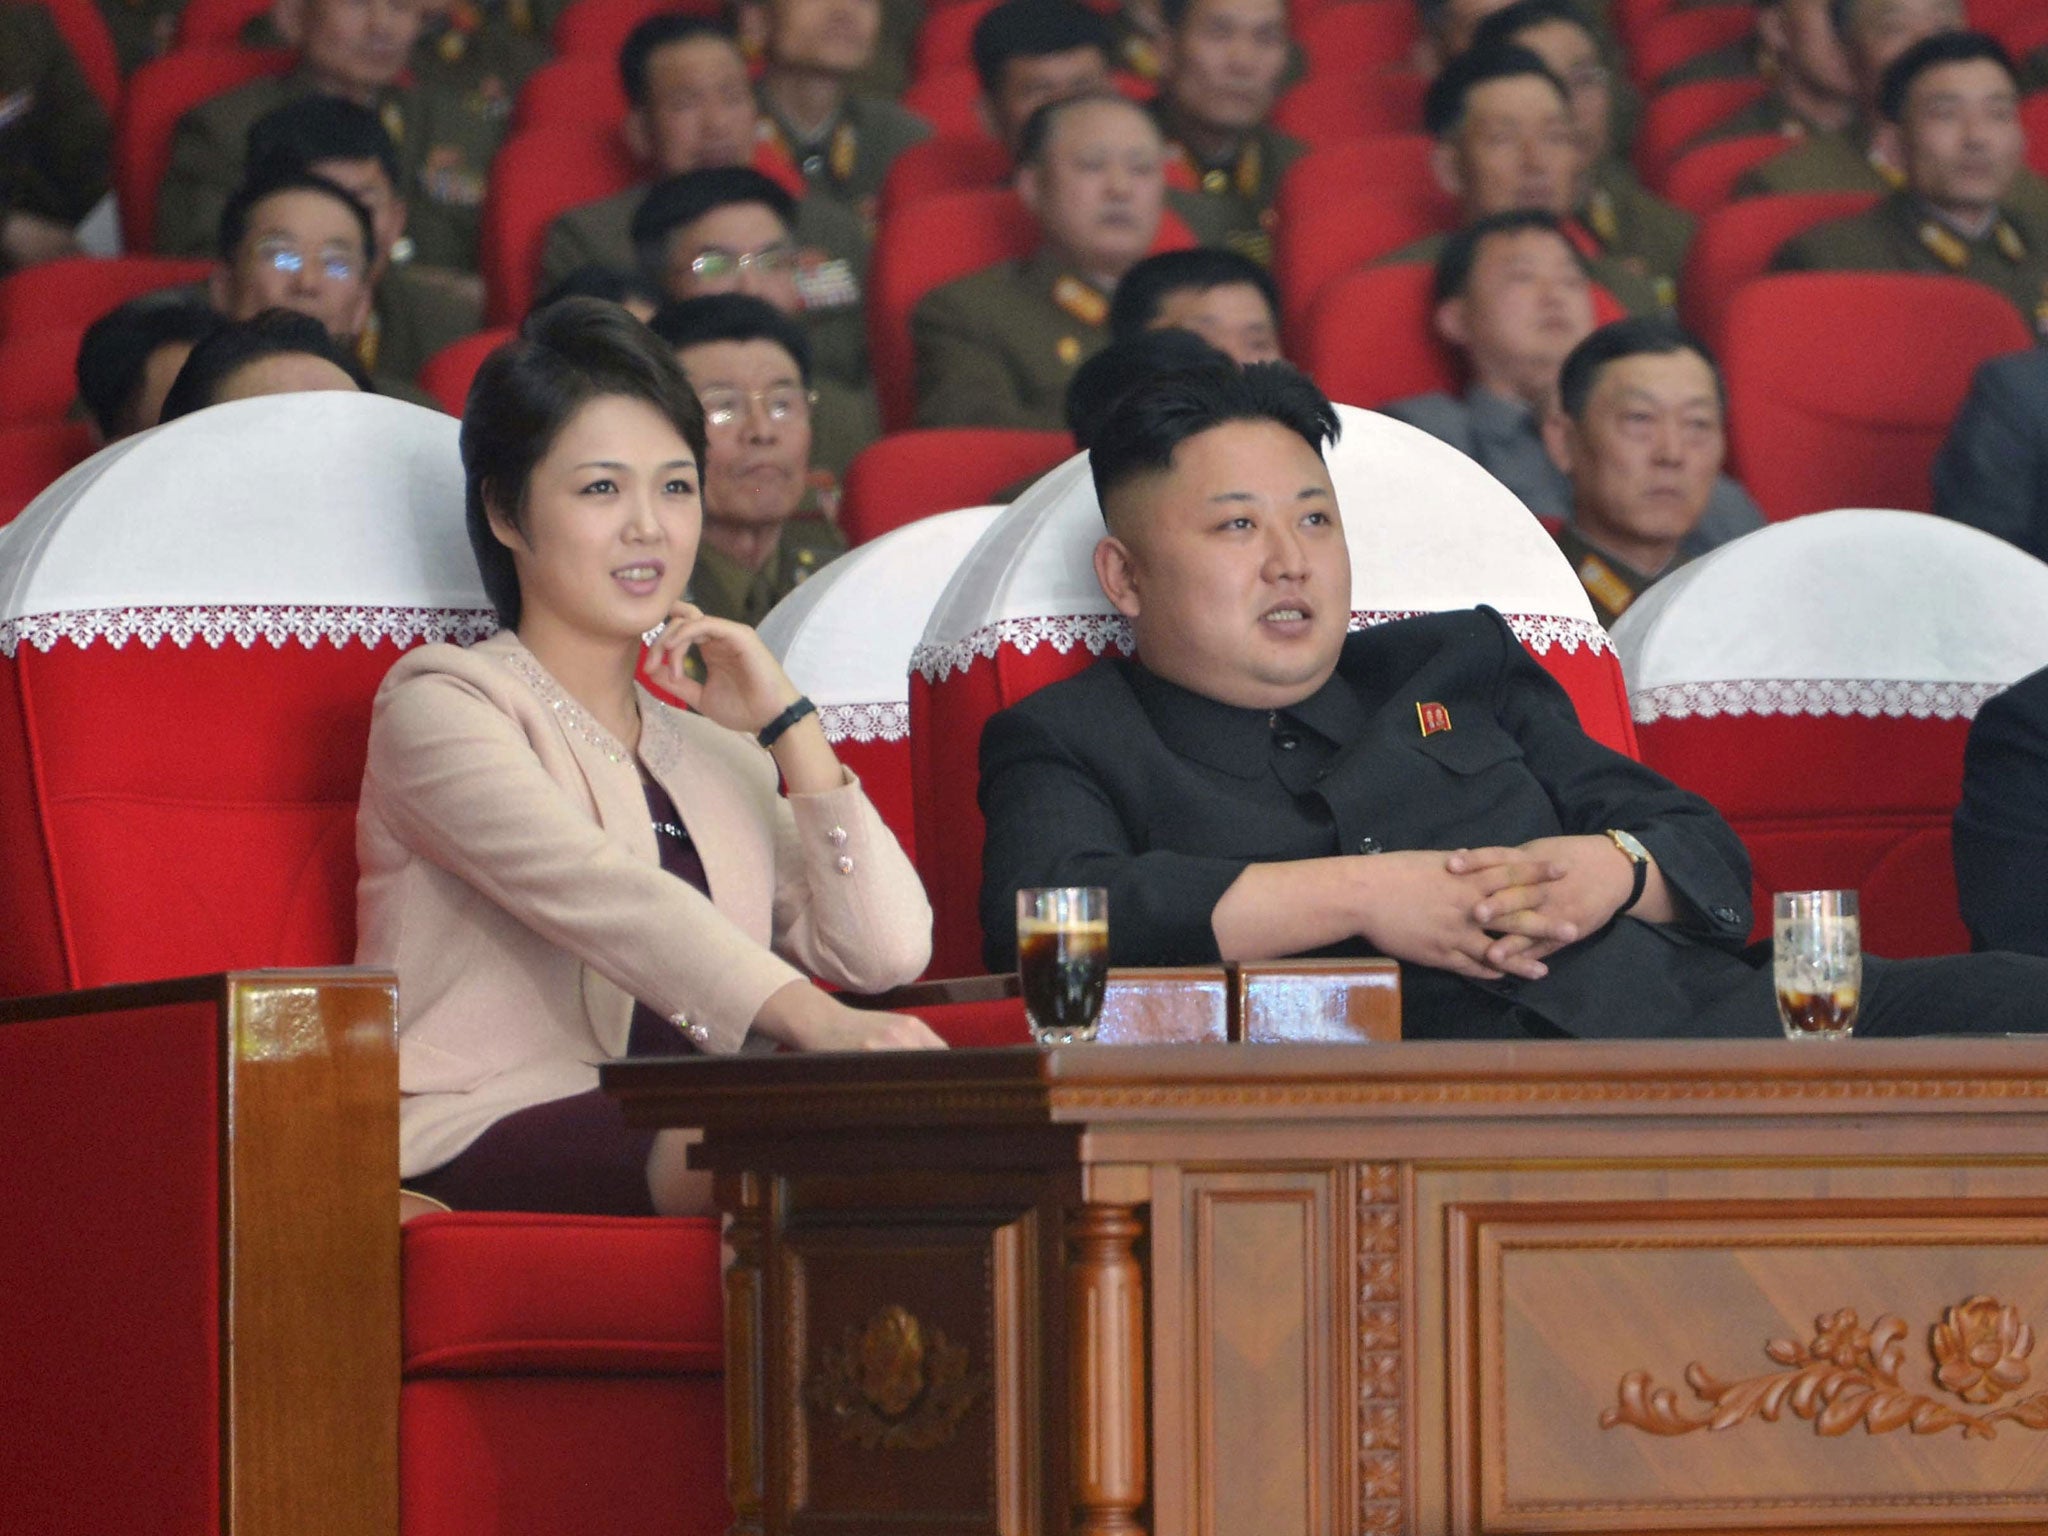 North Korean leader Kim Jong Un and his wife Ri Sol Ju watch a performance by the Moranbong Band at the April 25 House of Culture in Pyongyang